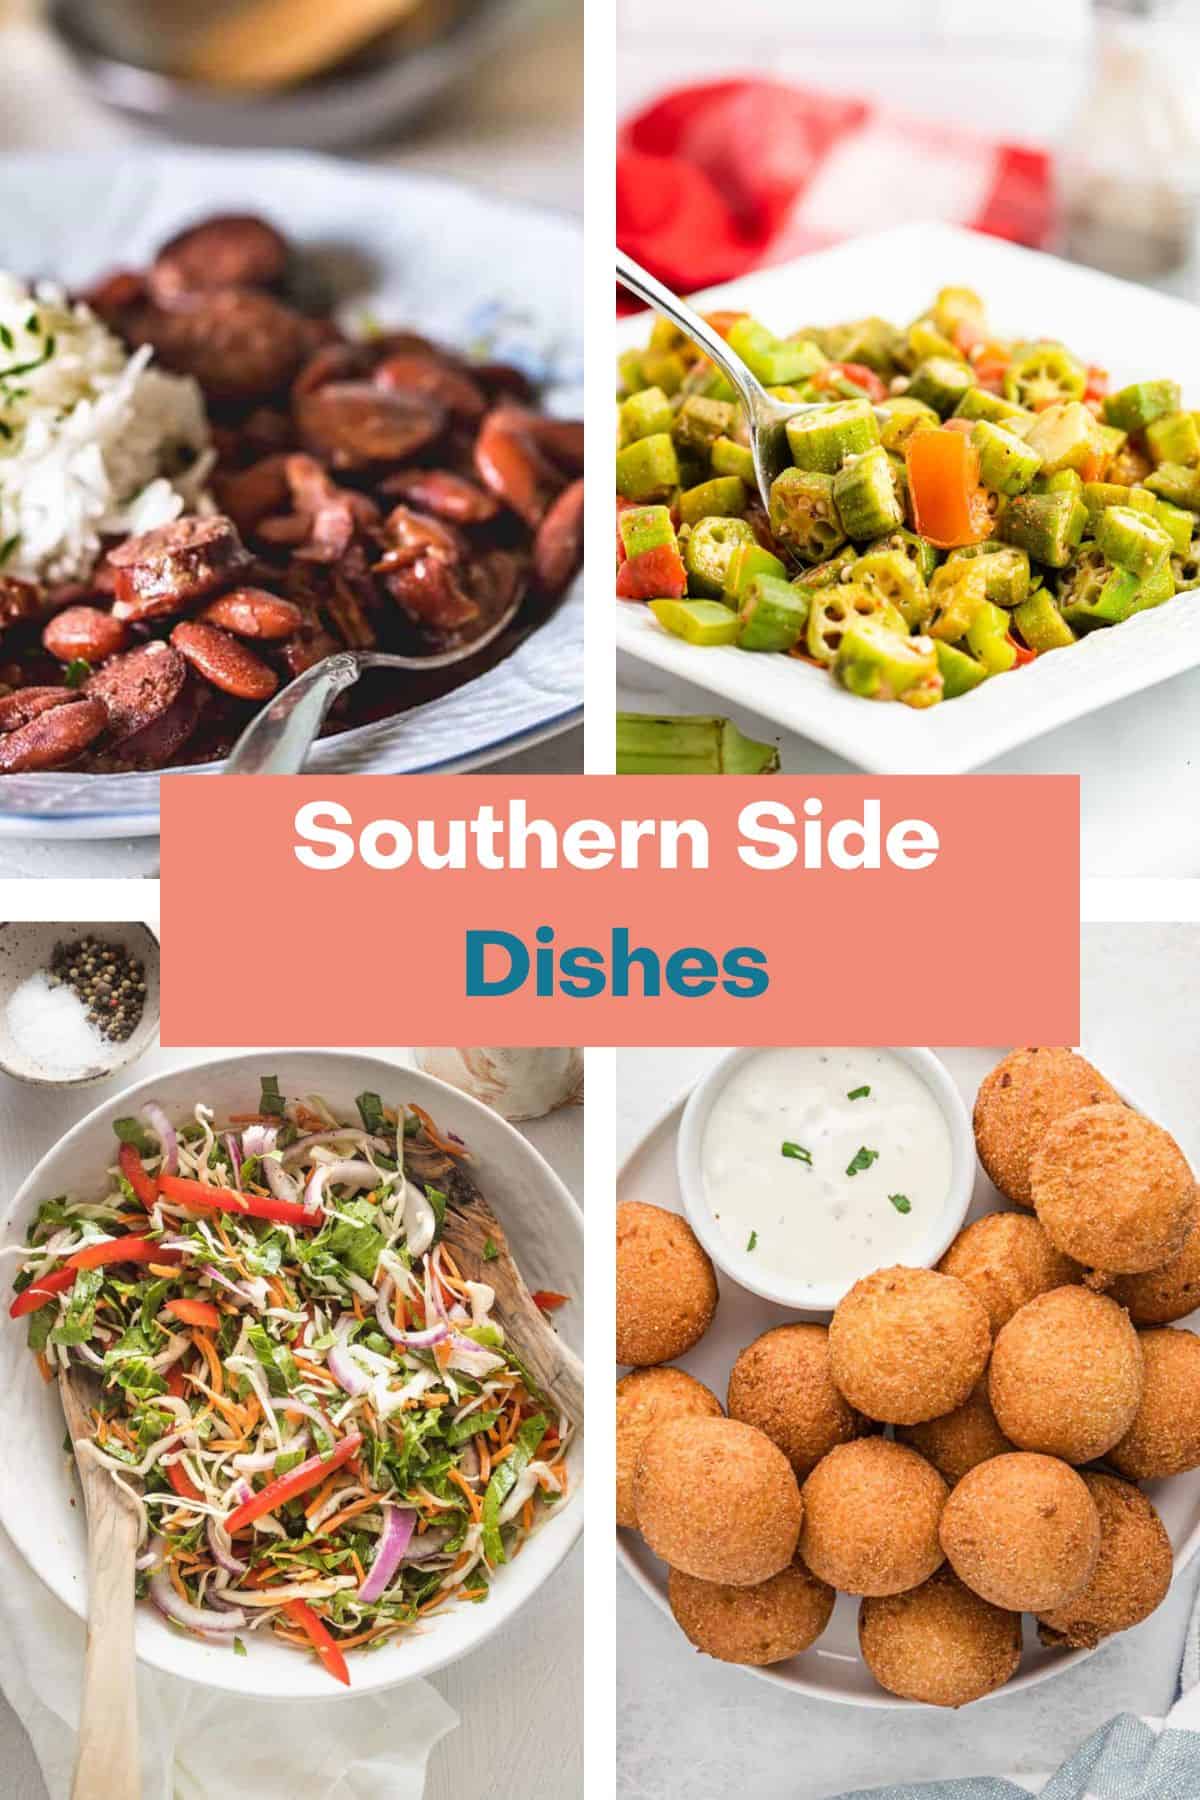 Southern Side Dish graphic